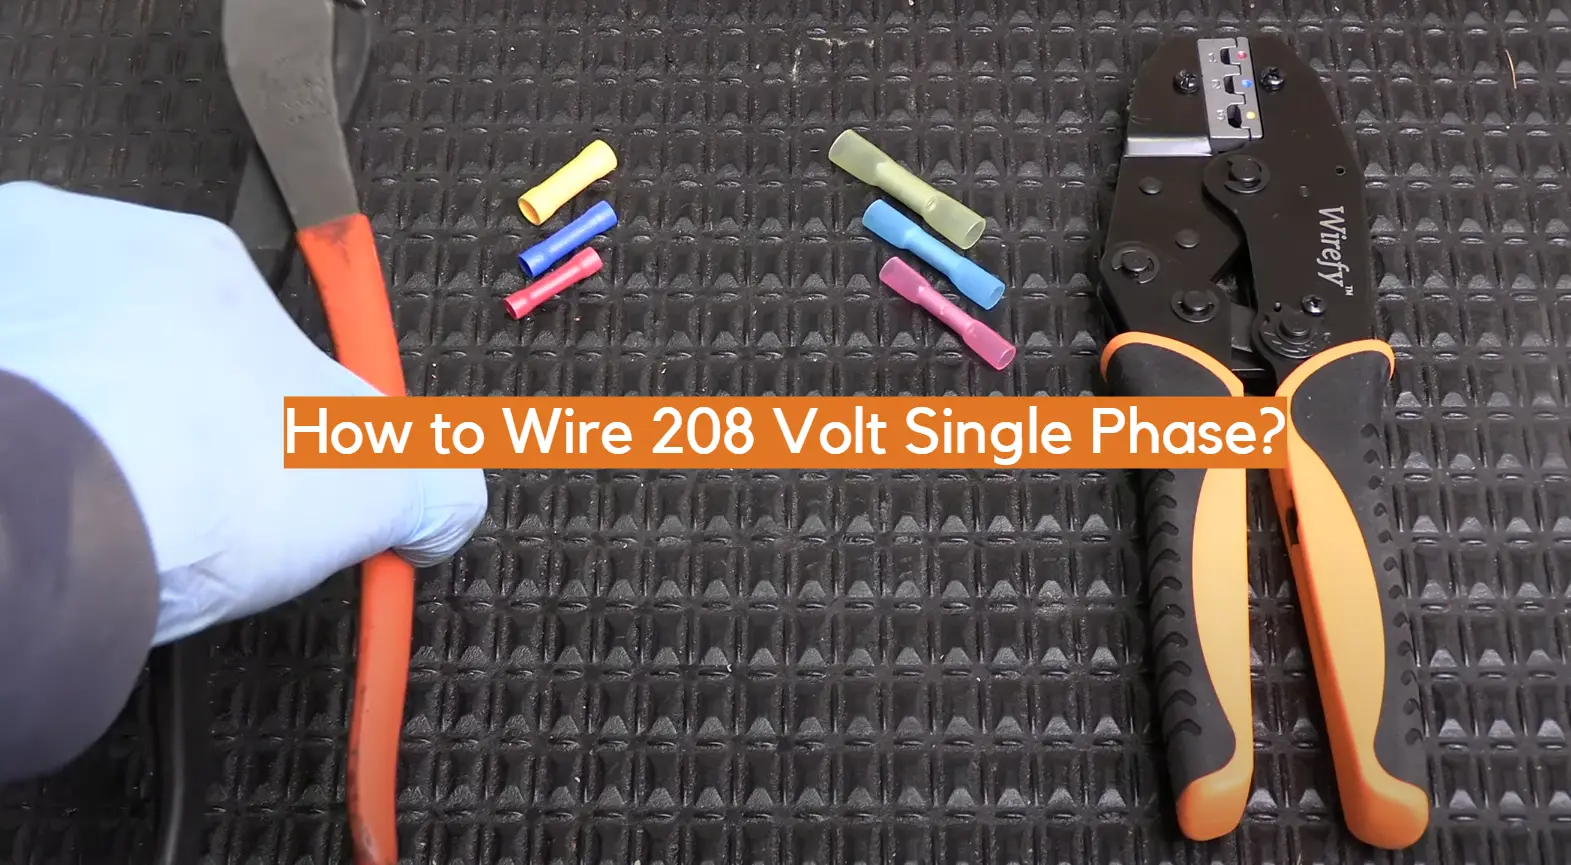 How to Wire 208 Volt Single Phase?